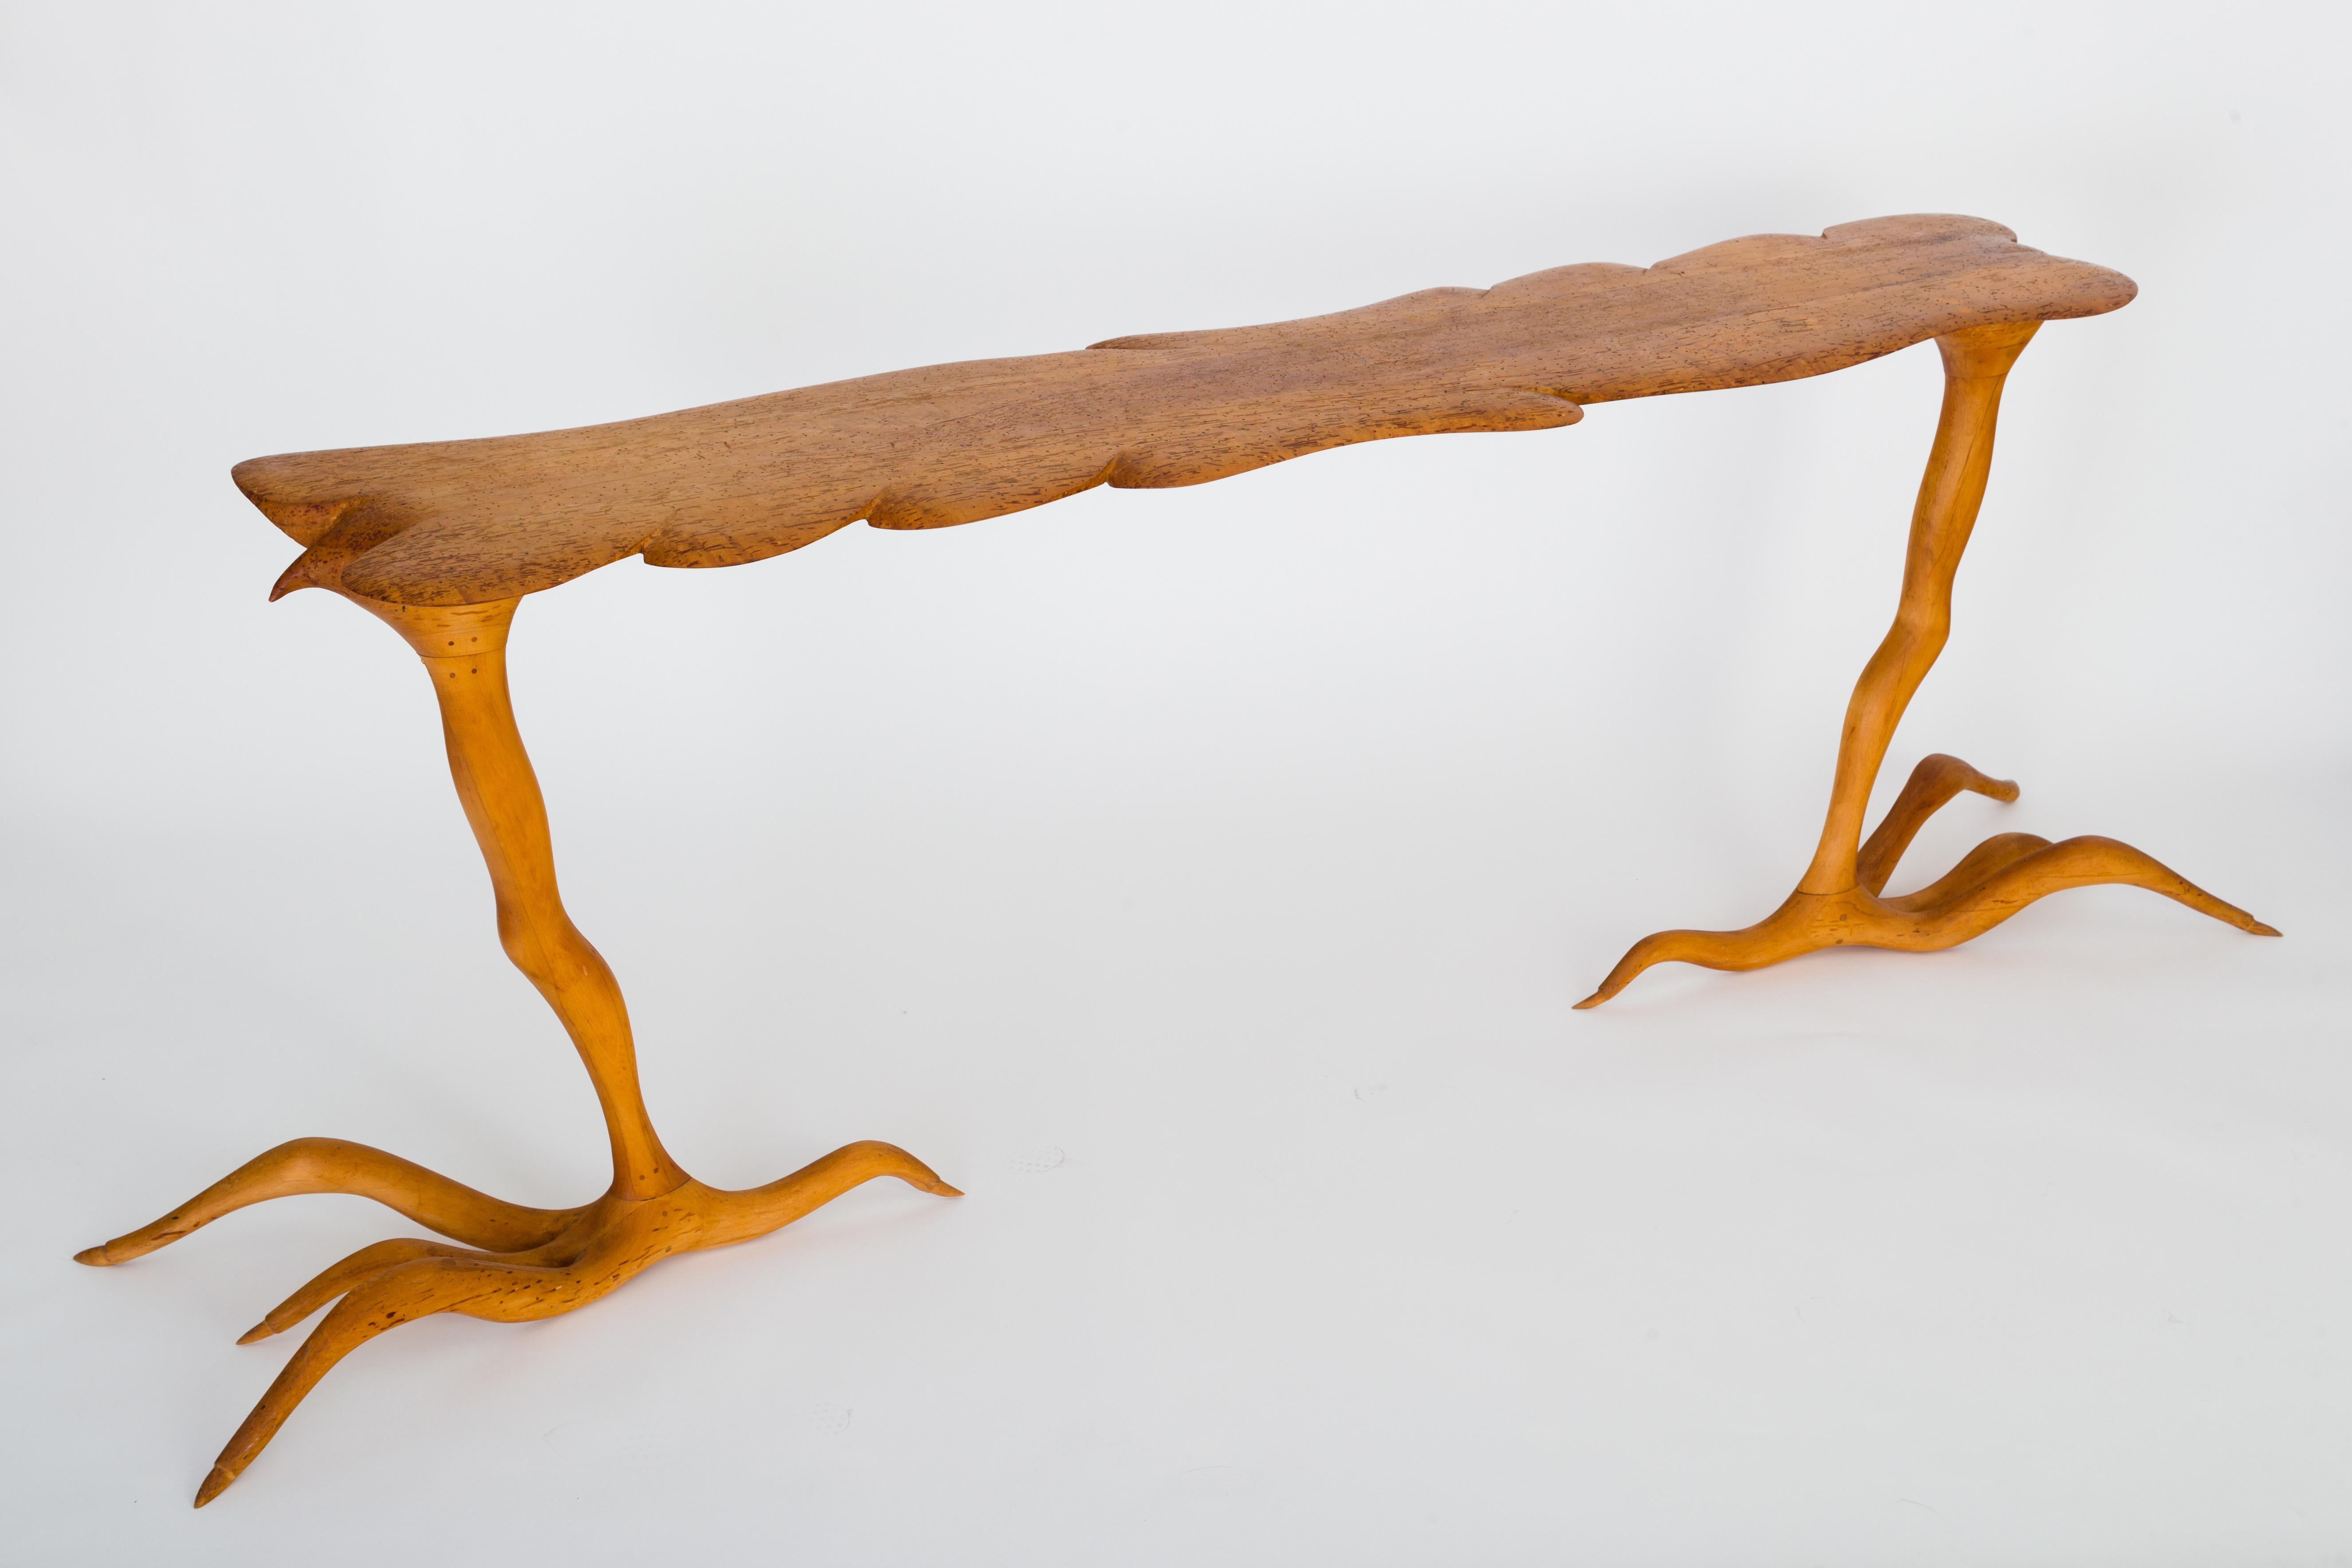 American Craftsman One-Off American Studio Surreal Console Table in Maple by Andrew J Willner, 1976 For Sale